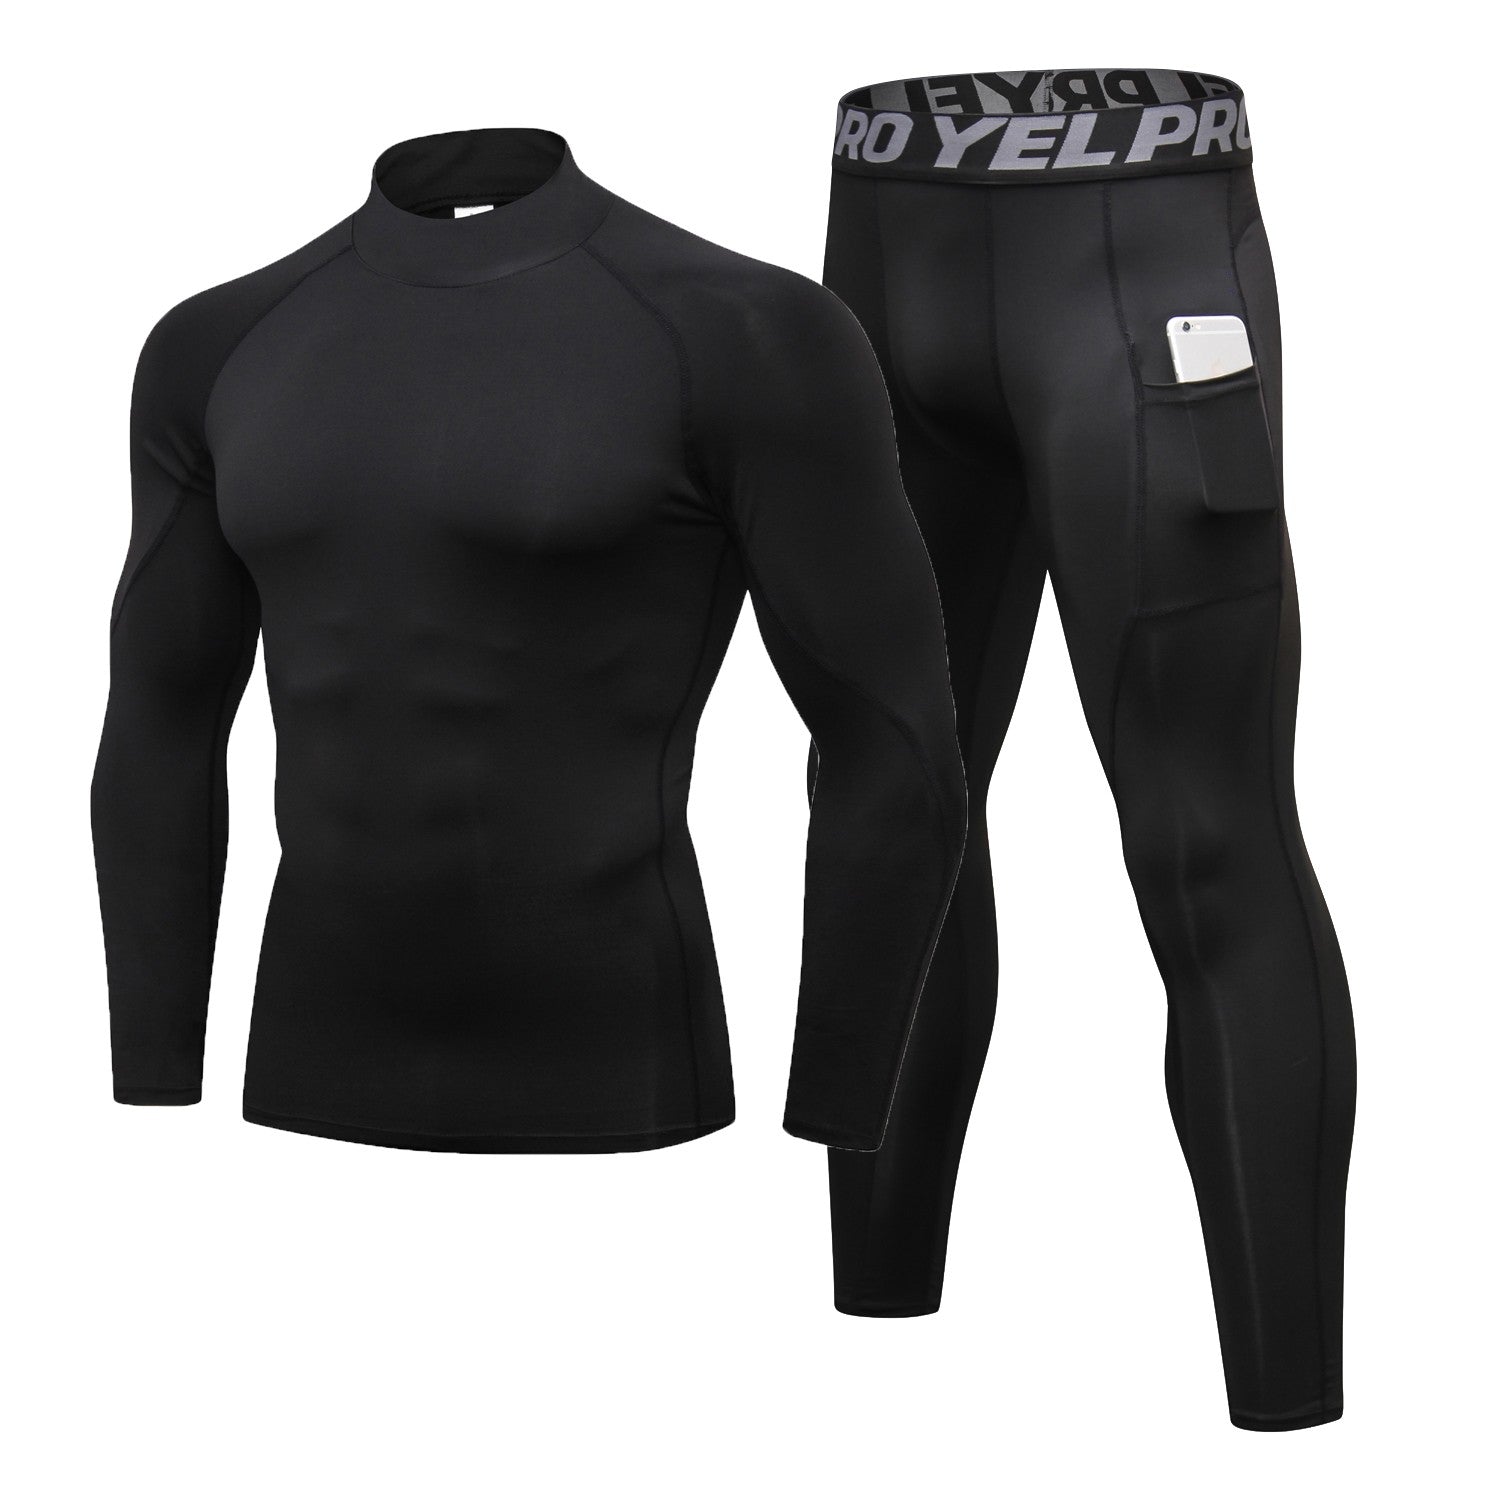 Men's Thermal Compression Pants, Athletic Sports Leggings & Running Tights,  Wintergear Base Layer Bottom - black